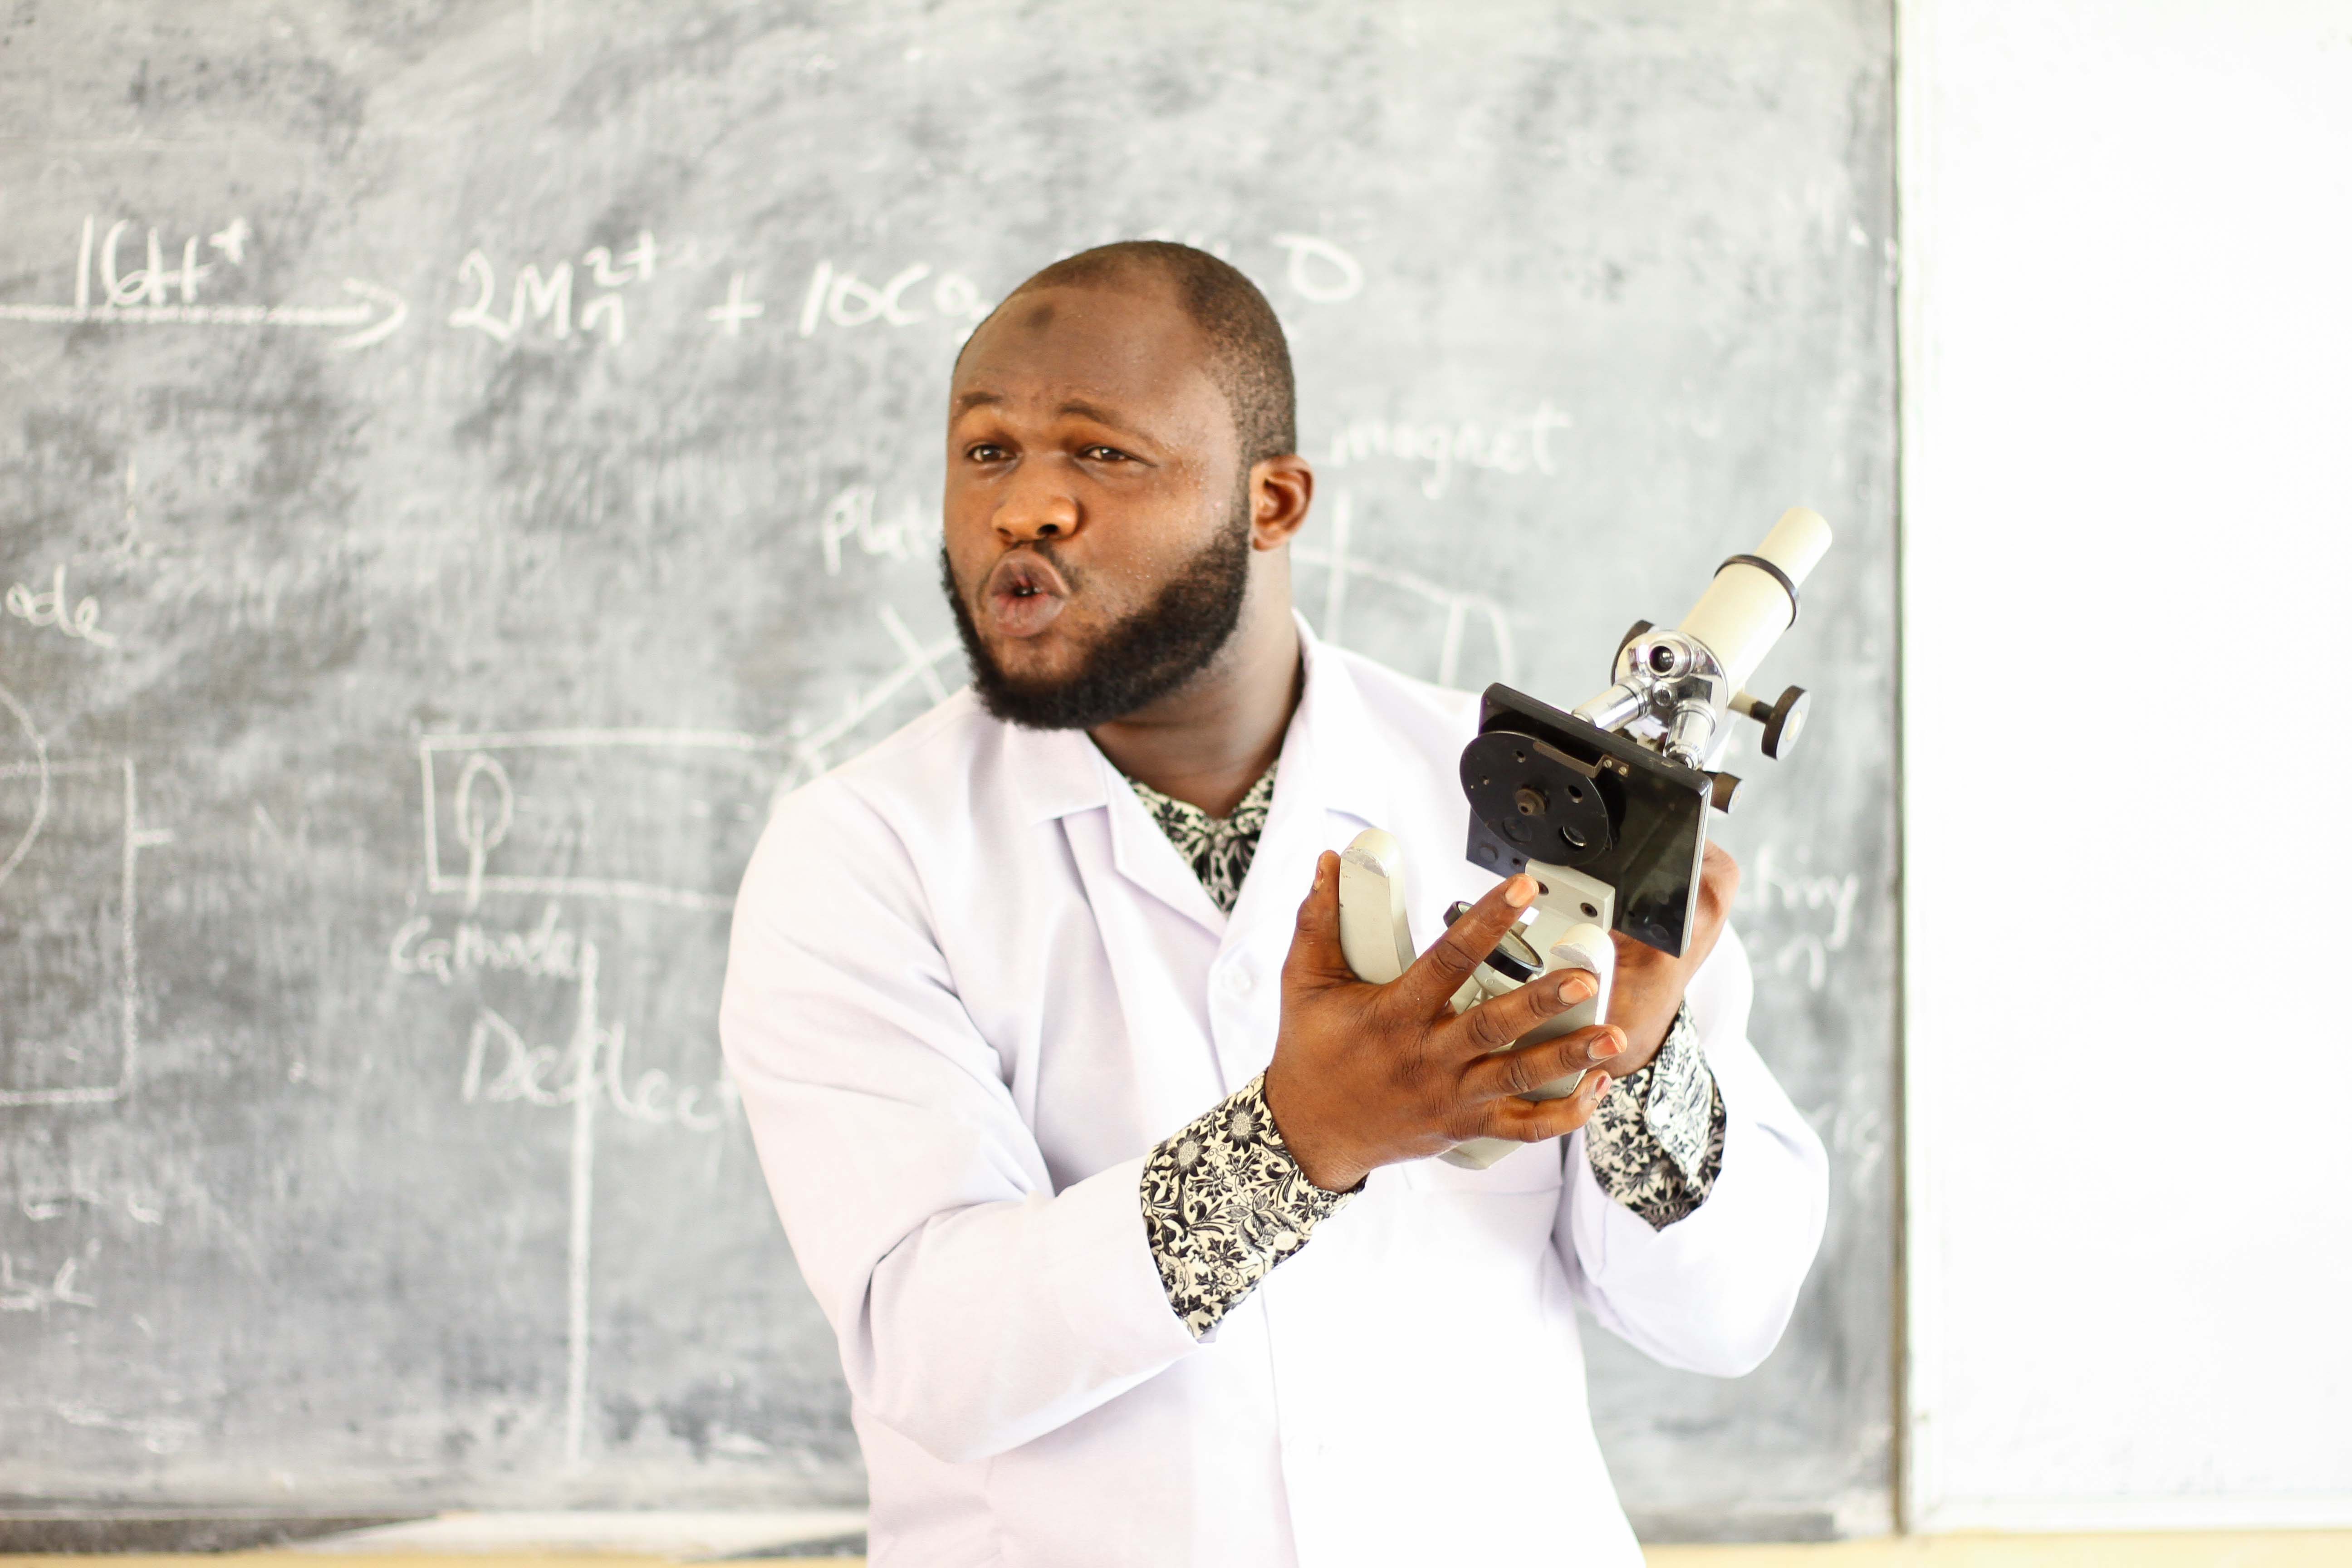 Lecturer teaching the students how to use a Microscope